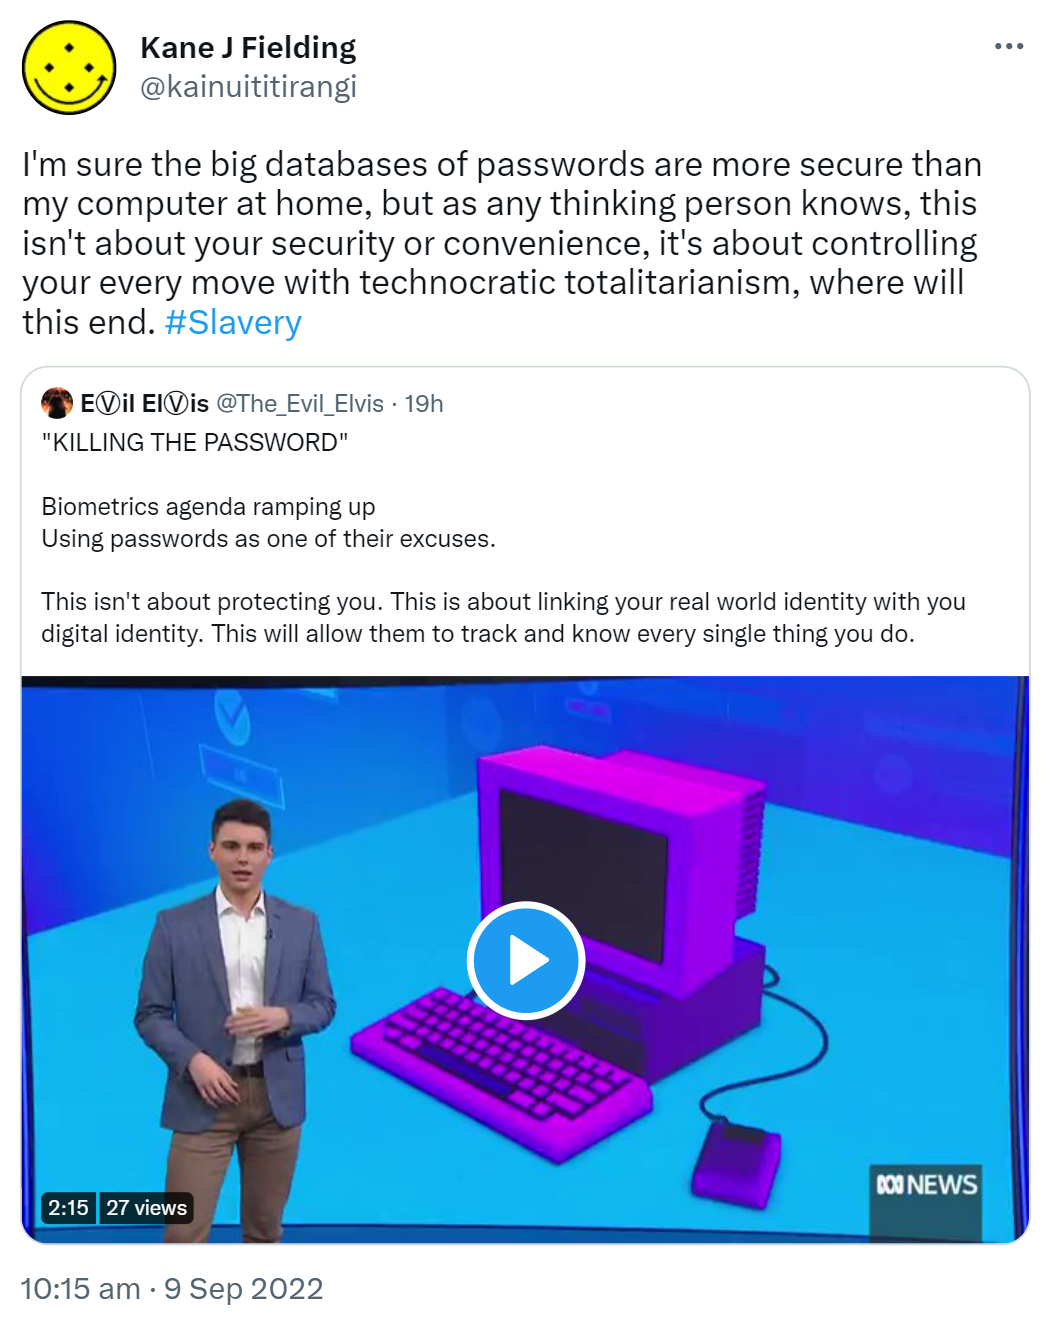 I'm sure the big databases of passwords are more secure than my computer at home, but as any thinking person knows, this isn't about your security or convenience, it's about controlling your every move with technocratic totalitarianism, where will this end. Hashtag Slavery. Quote Tweet. EⓋil ElⓋis @The_Evil_Elvis. KILLING THE PASSWORD. Biometrics agenda ramping up. Using passwords as one of their excuses. This isn't about protecting you. This is about linking your real world identity with your digital identity. This will allow them to track and know every single thing you do. 10:15 am · 9 Sep 2022.